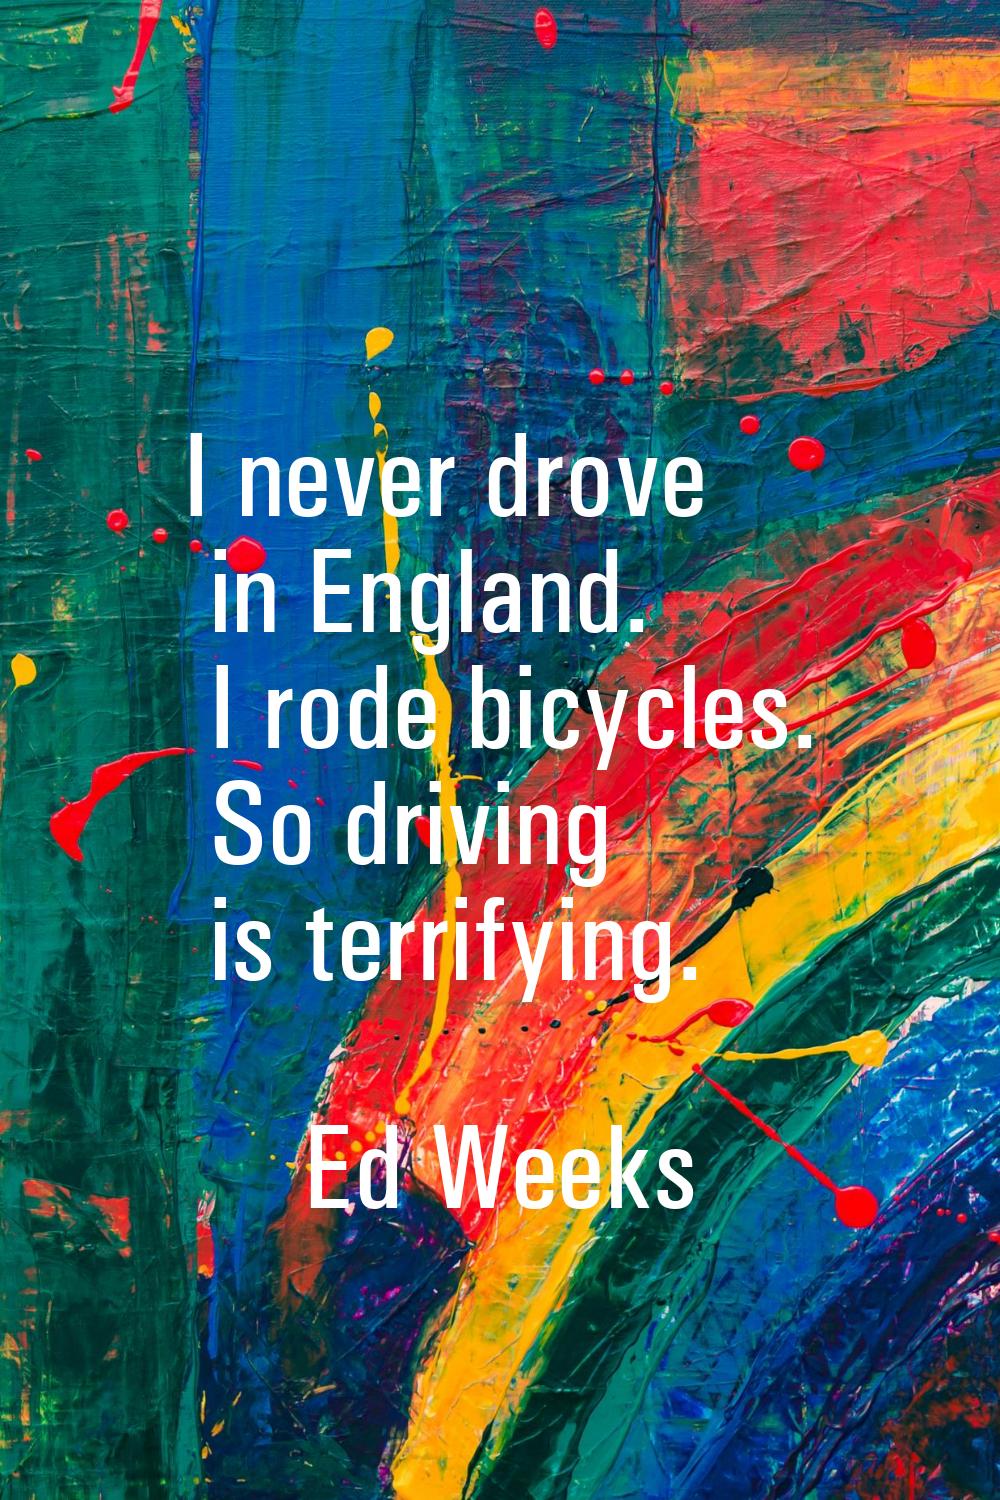 I never drove in England. I rode bicycles. So driving is terrifying.